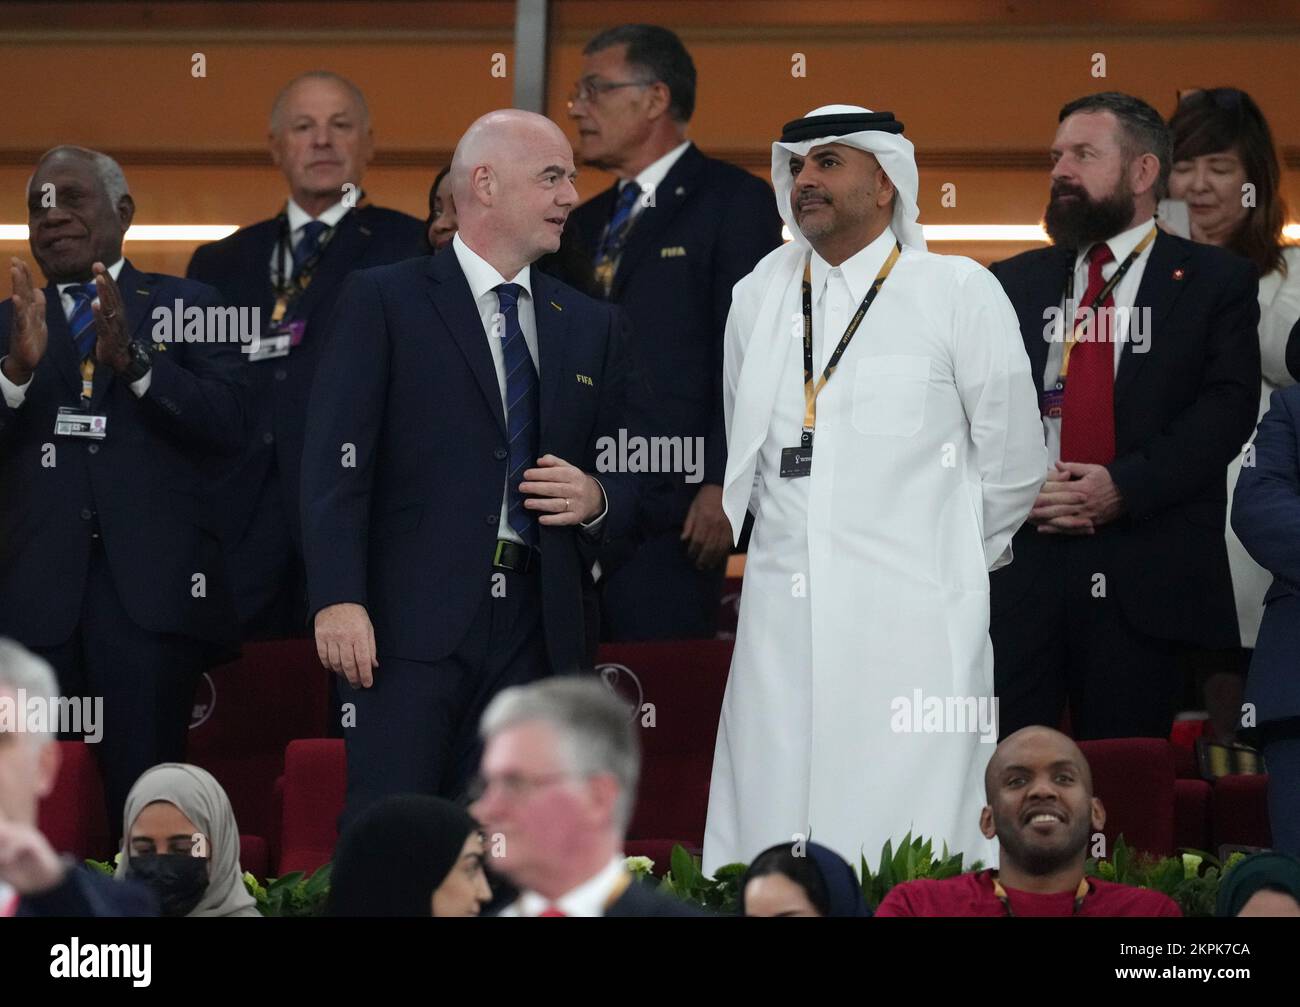 FIFA President Gianni Infantino (left) and Sheikh Khalid bin Khalifa bin Abdul Aziz Al Thani in the stands before the FIFA World Cup Group G match at Stadium 974 in Doha, Qatar. Picture date: Monday November 28, 2022. Stock Photo